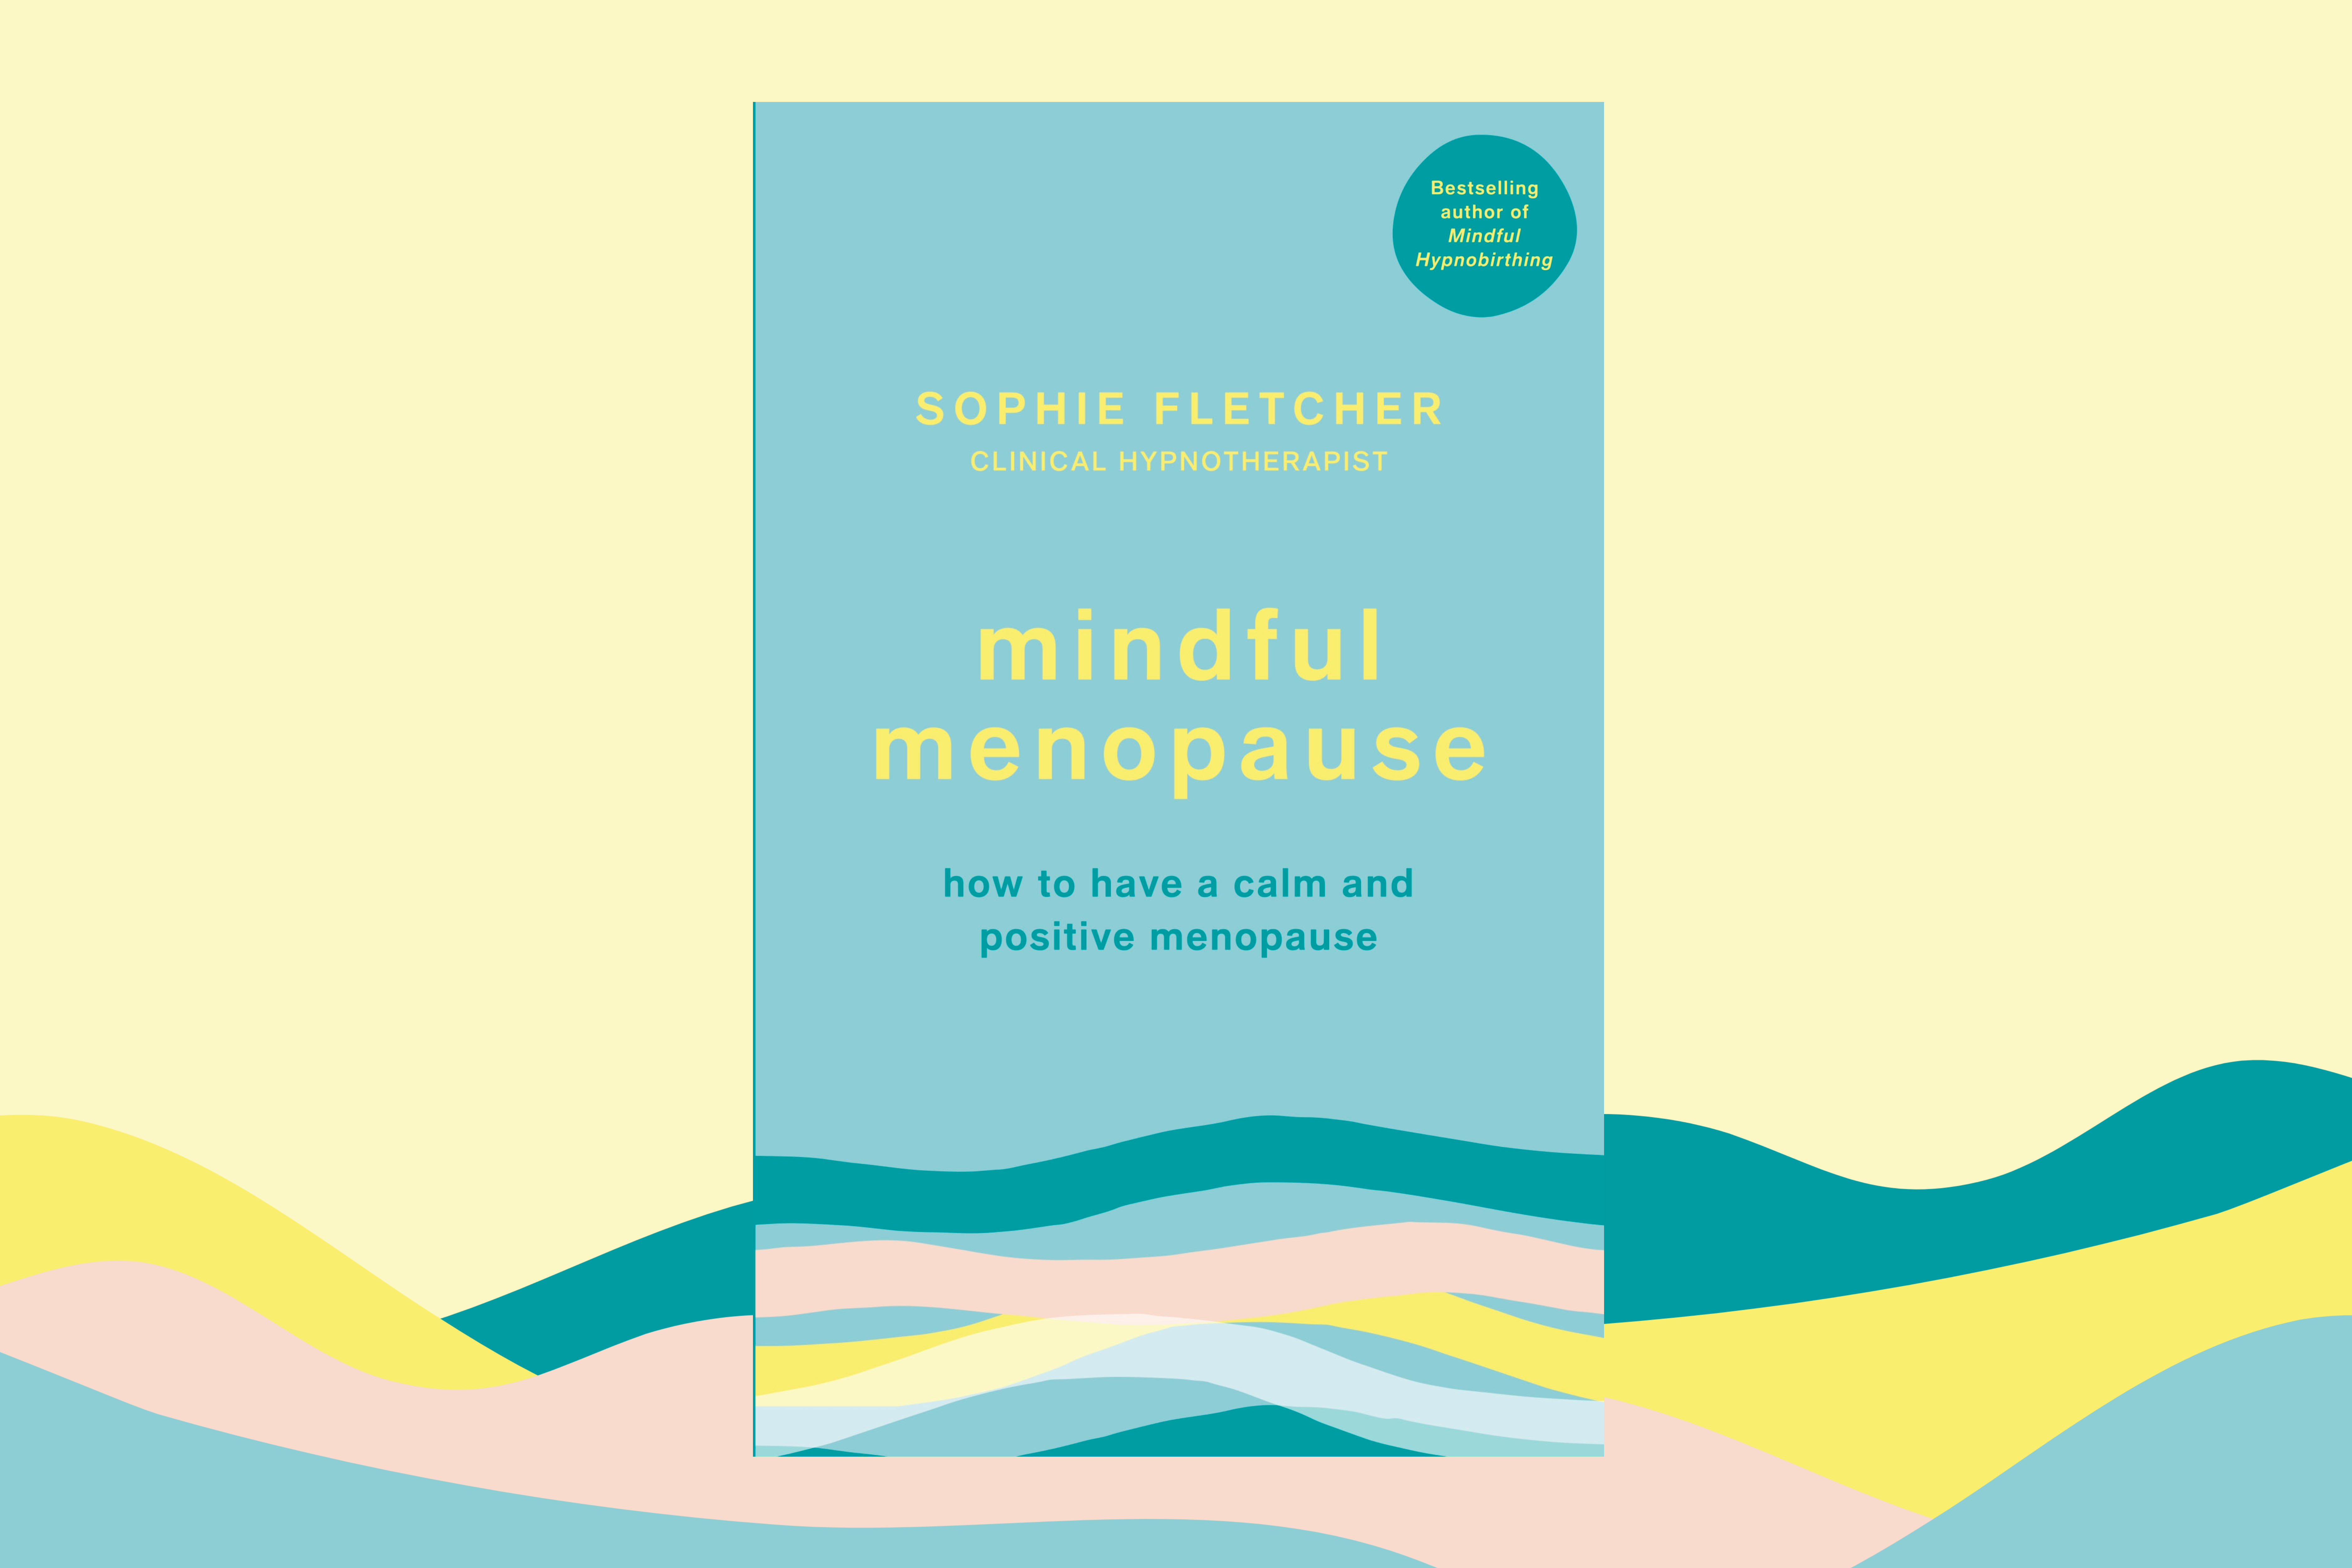 The book Mindful Menopause by Sophie Fletcher against a pastel-coloured background